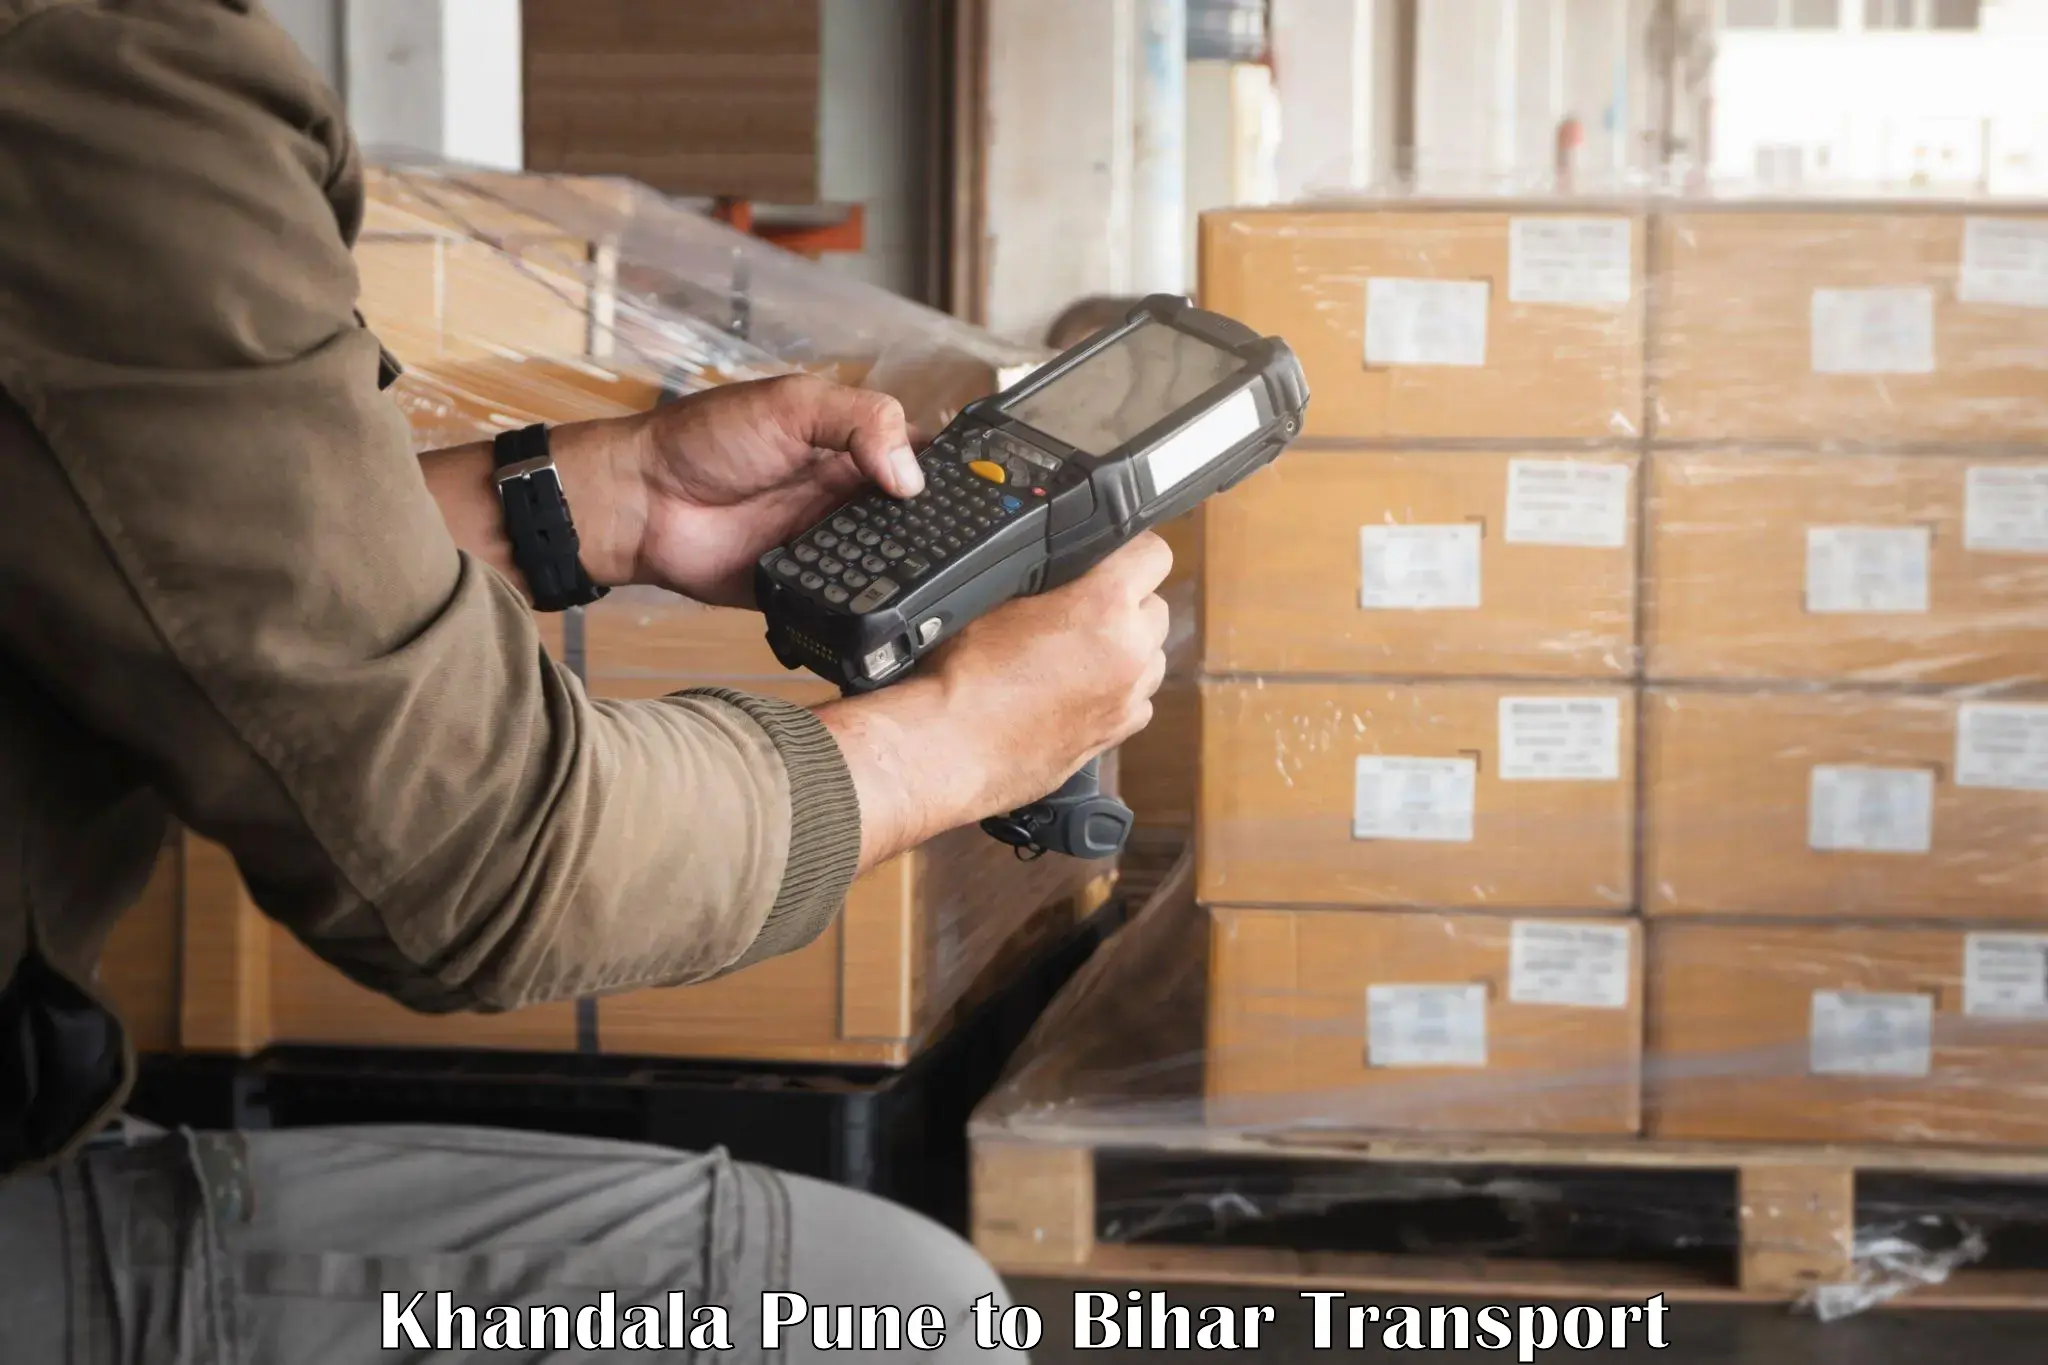 Part load transport service in India Khandala Pune to Sheohar